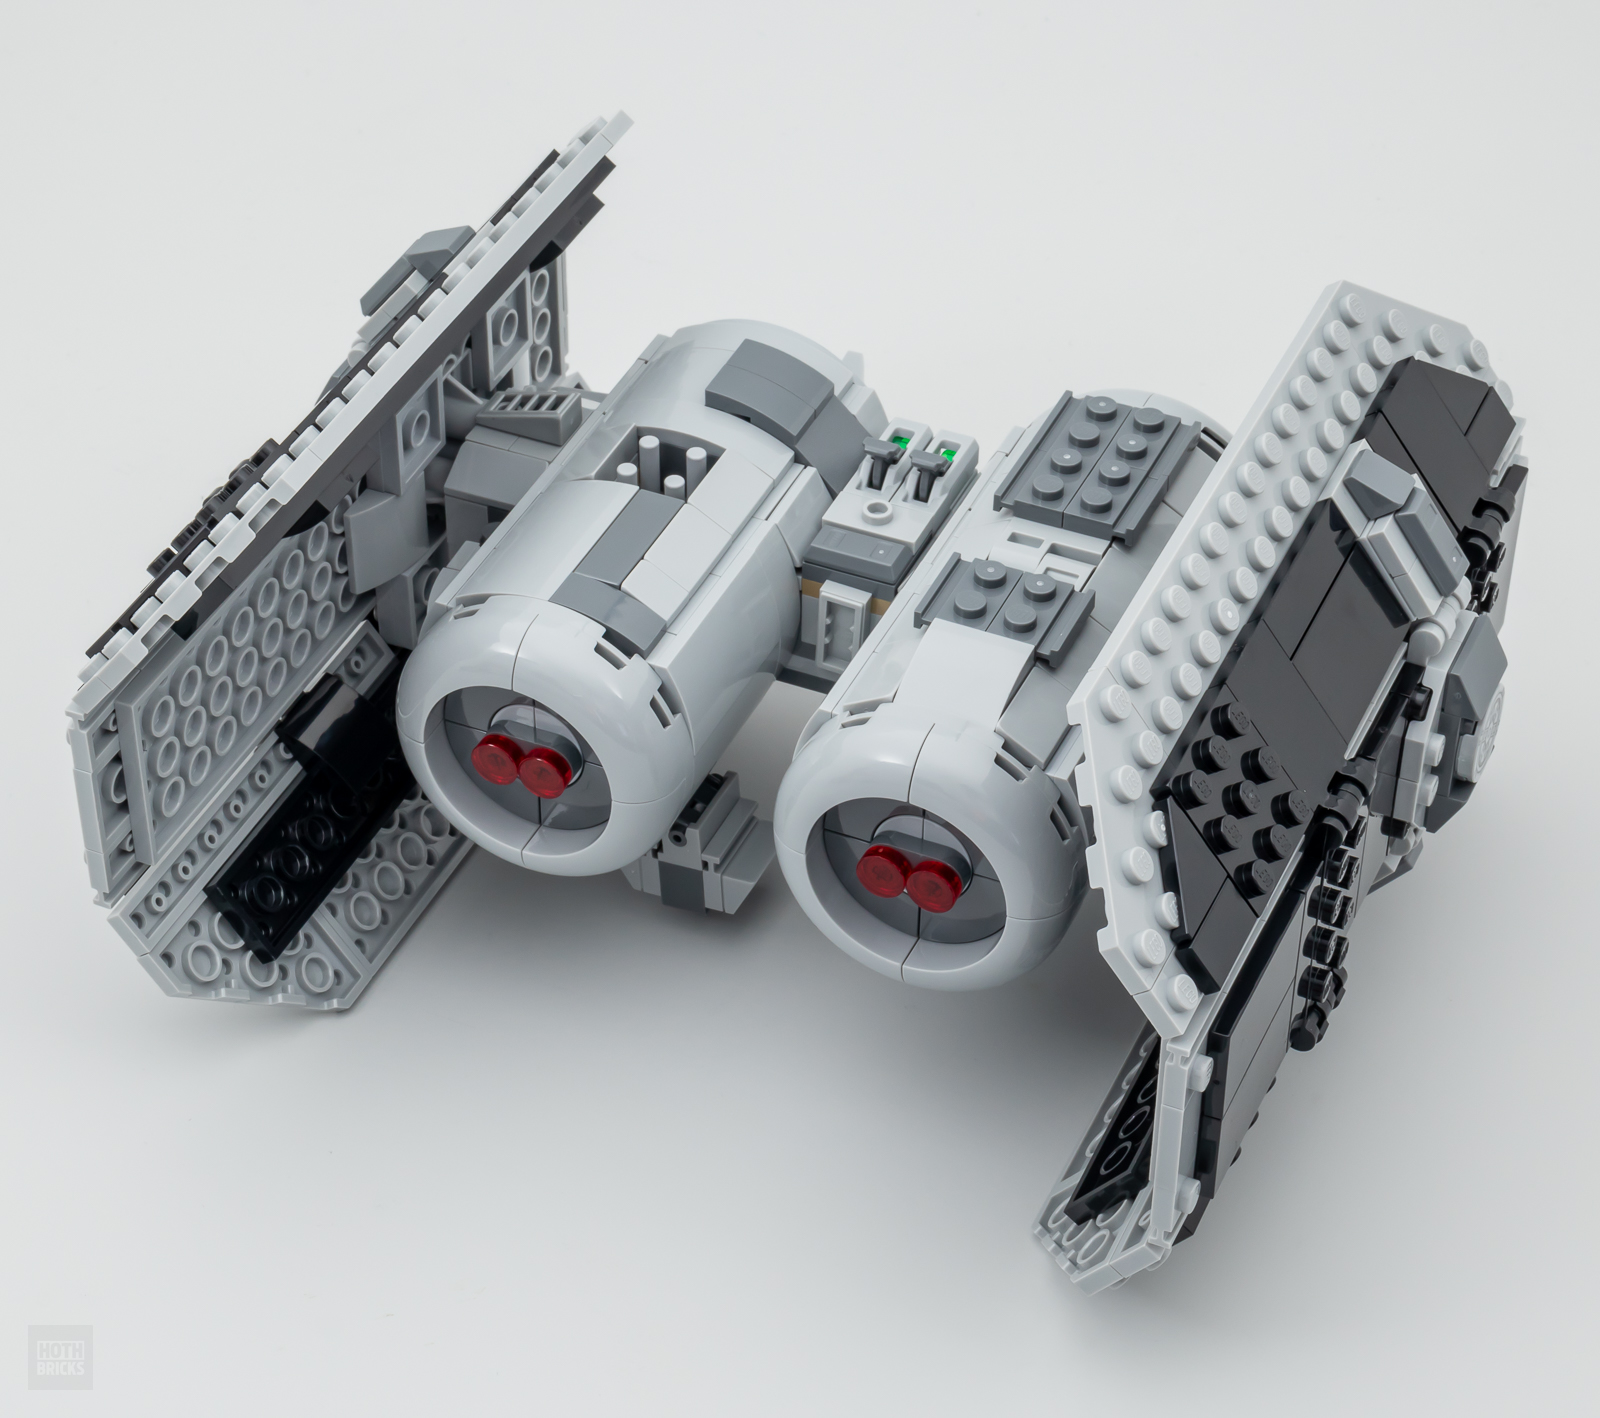 ▻ Review: LEGO Star Wars 75347 Tie Bomber - HOTH BRICKS